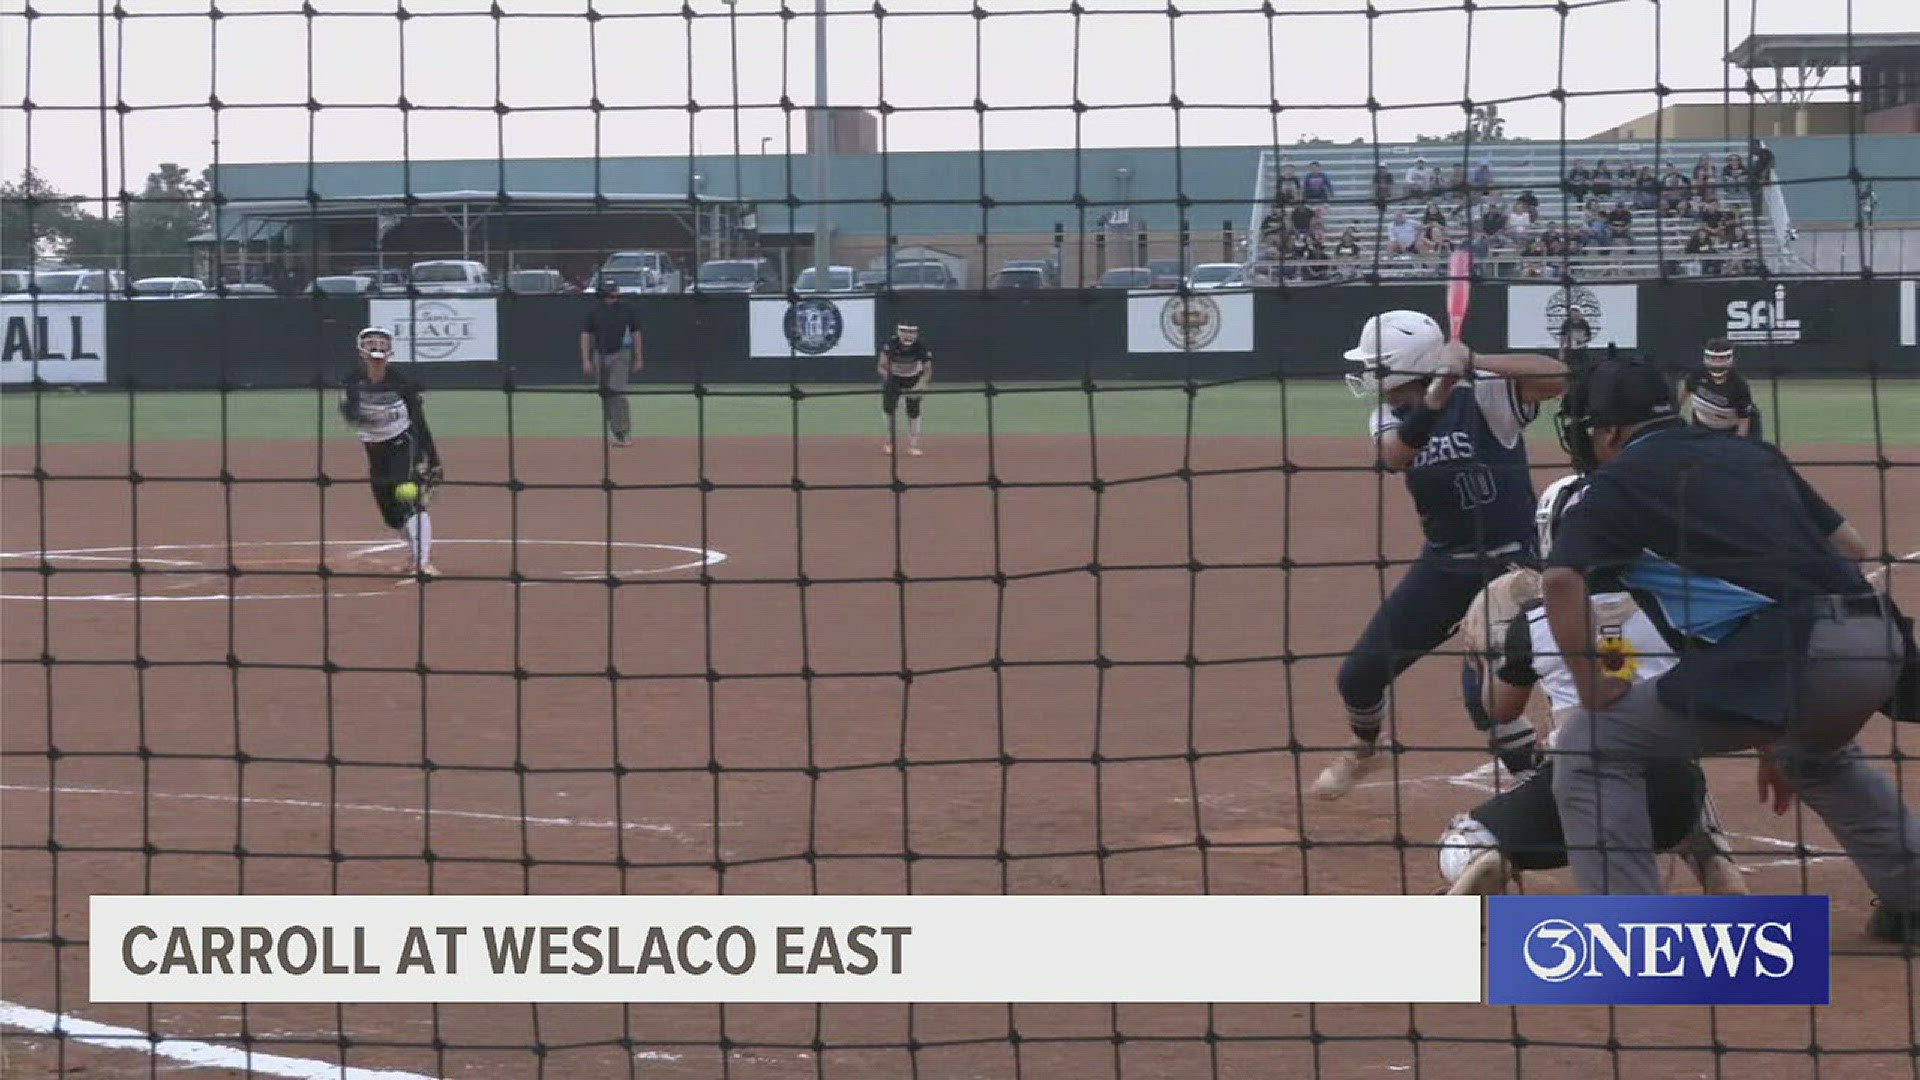 The Tigers scored early and often in a 15-6 win over Weslaco East. The series continues Saturday at 2 PM at Cabaniss. Video courtesy KRGV-TV.